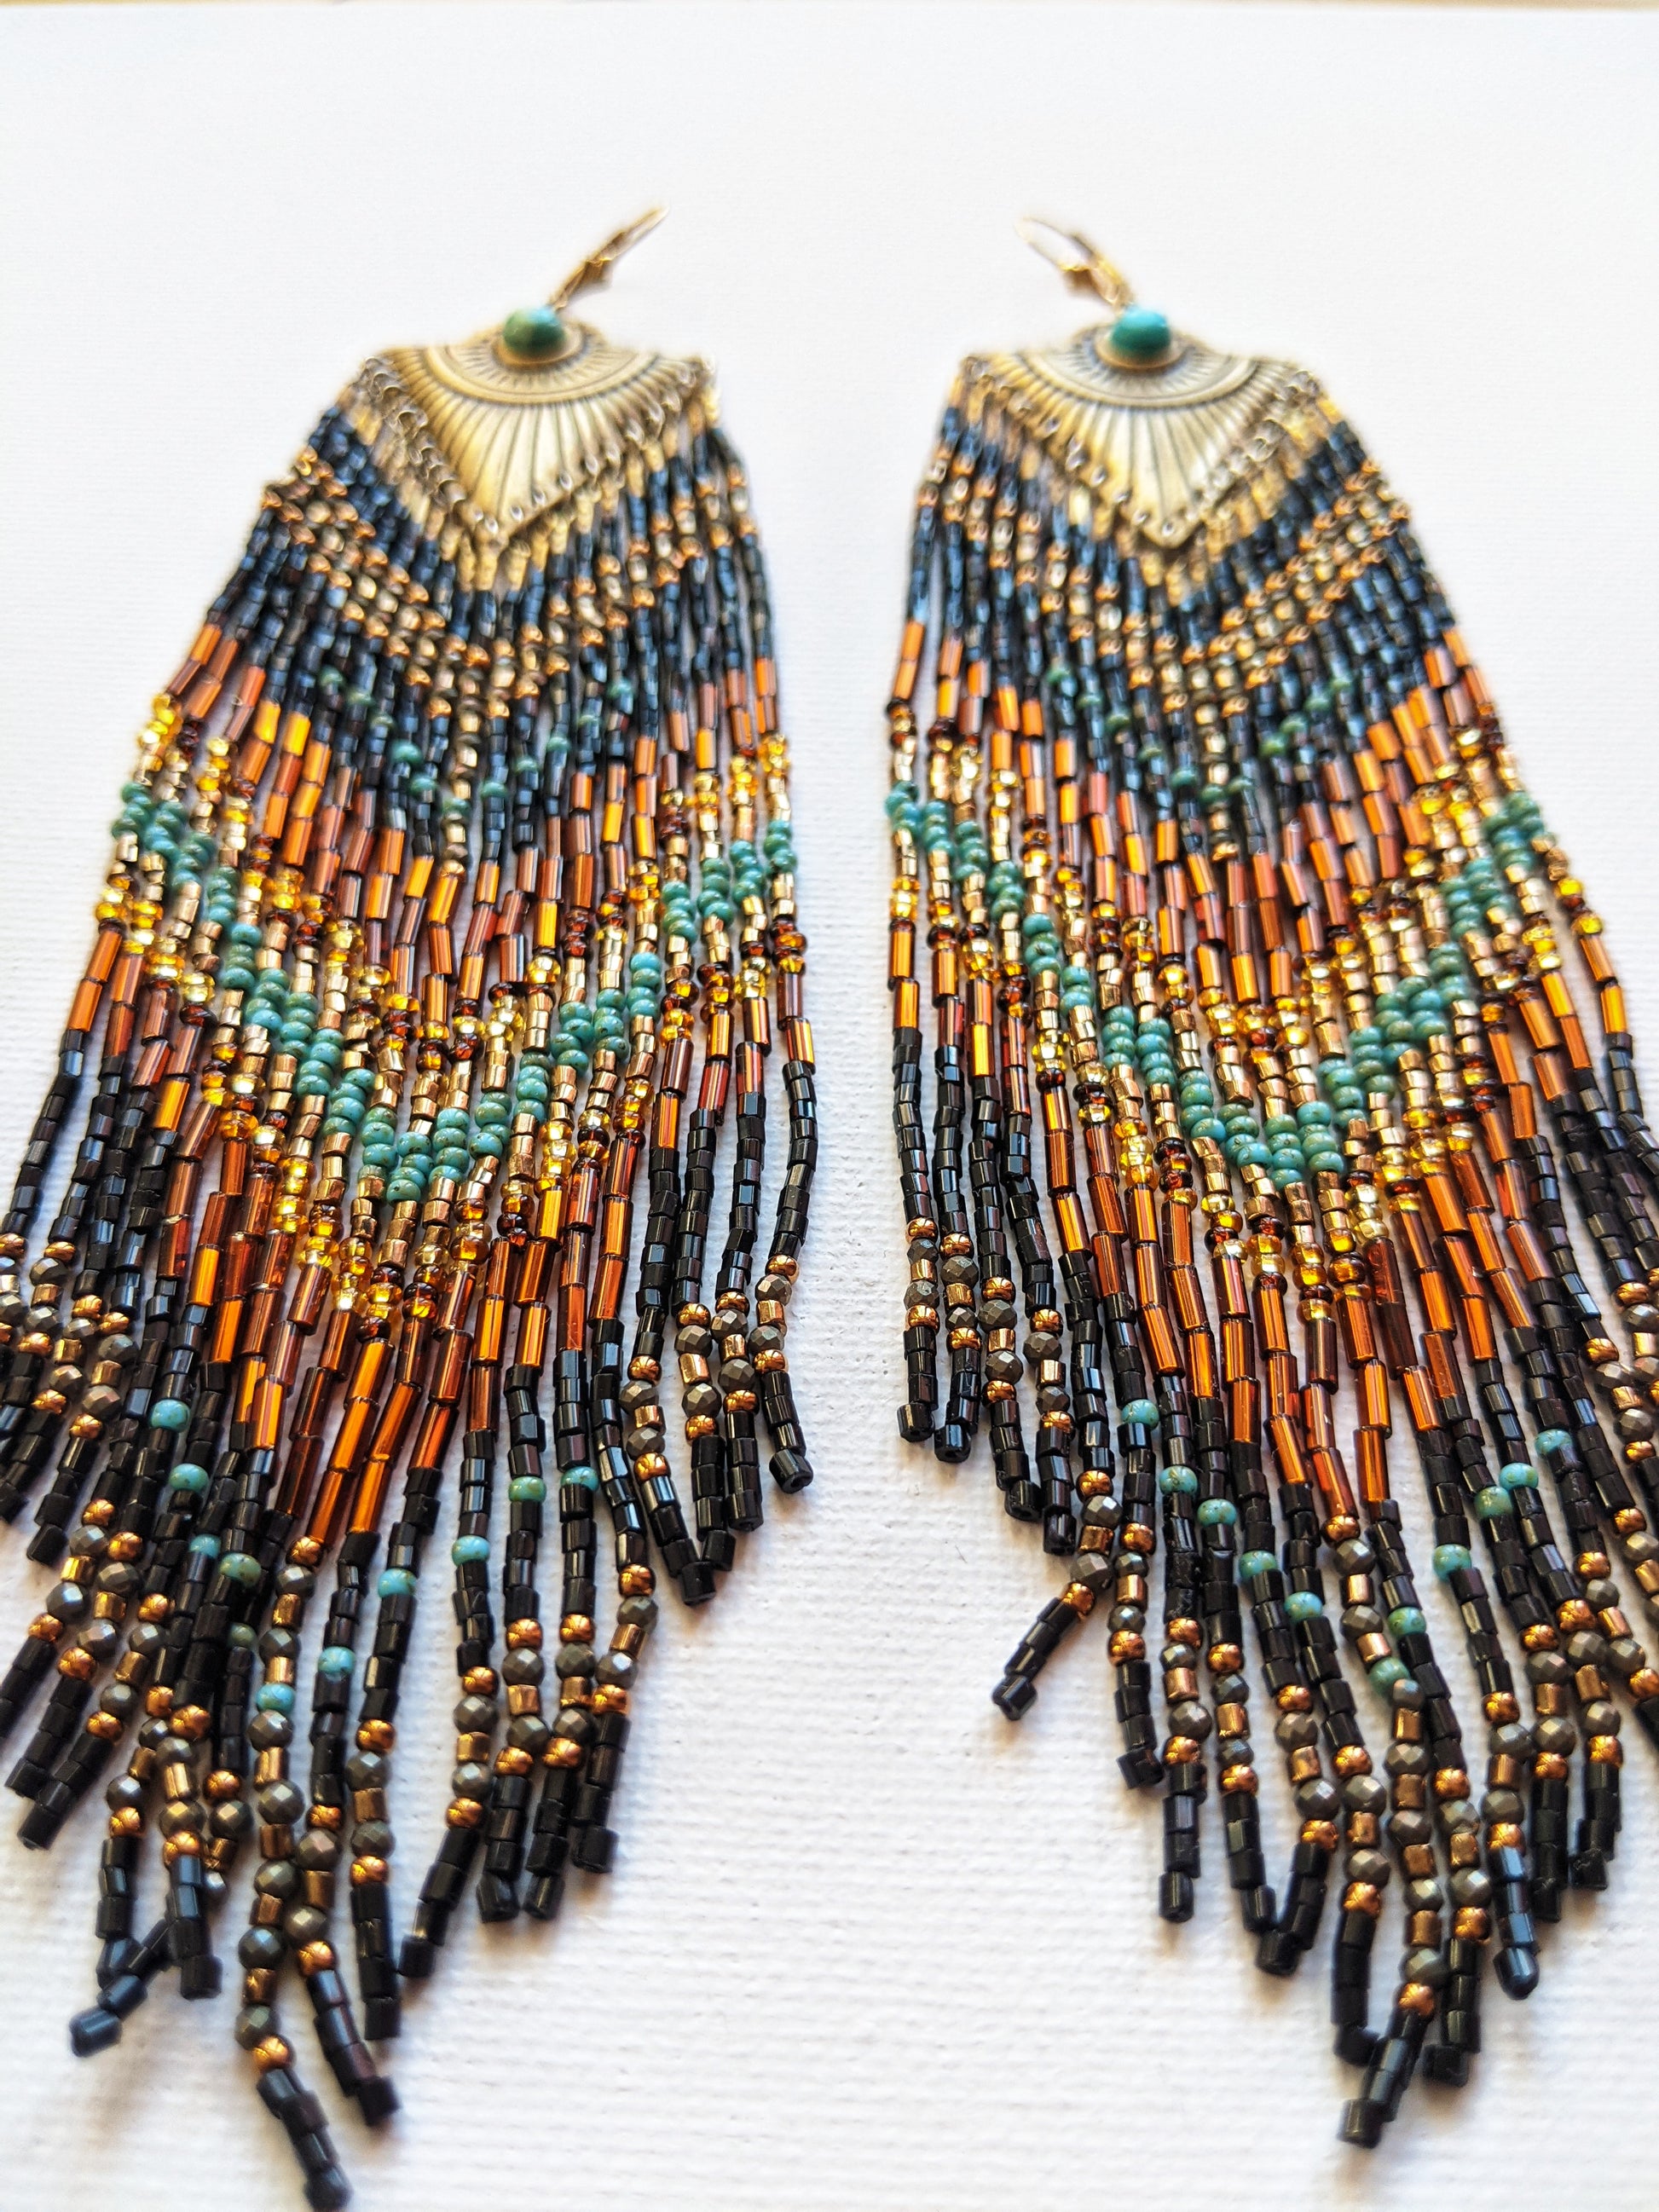 Moon & Milk - Handmade beaded tribal earrings created with semi-precious stones such as turquoise and pyrite, glass seed beads, and gold-filled ear wires.